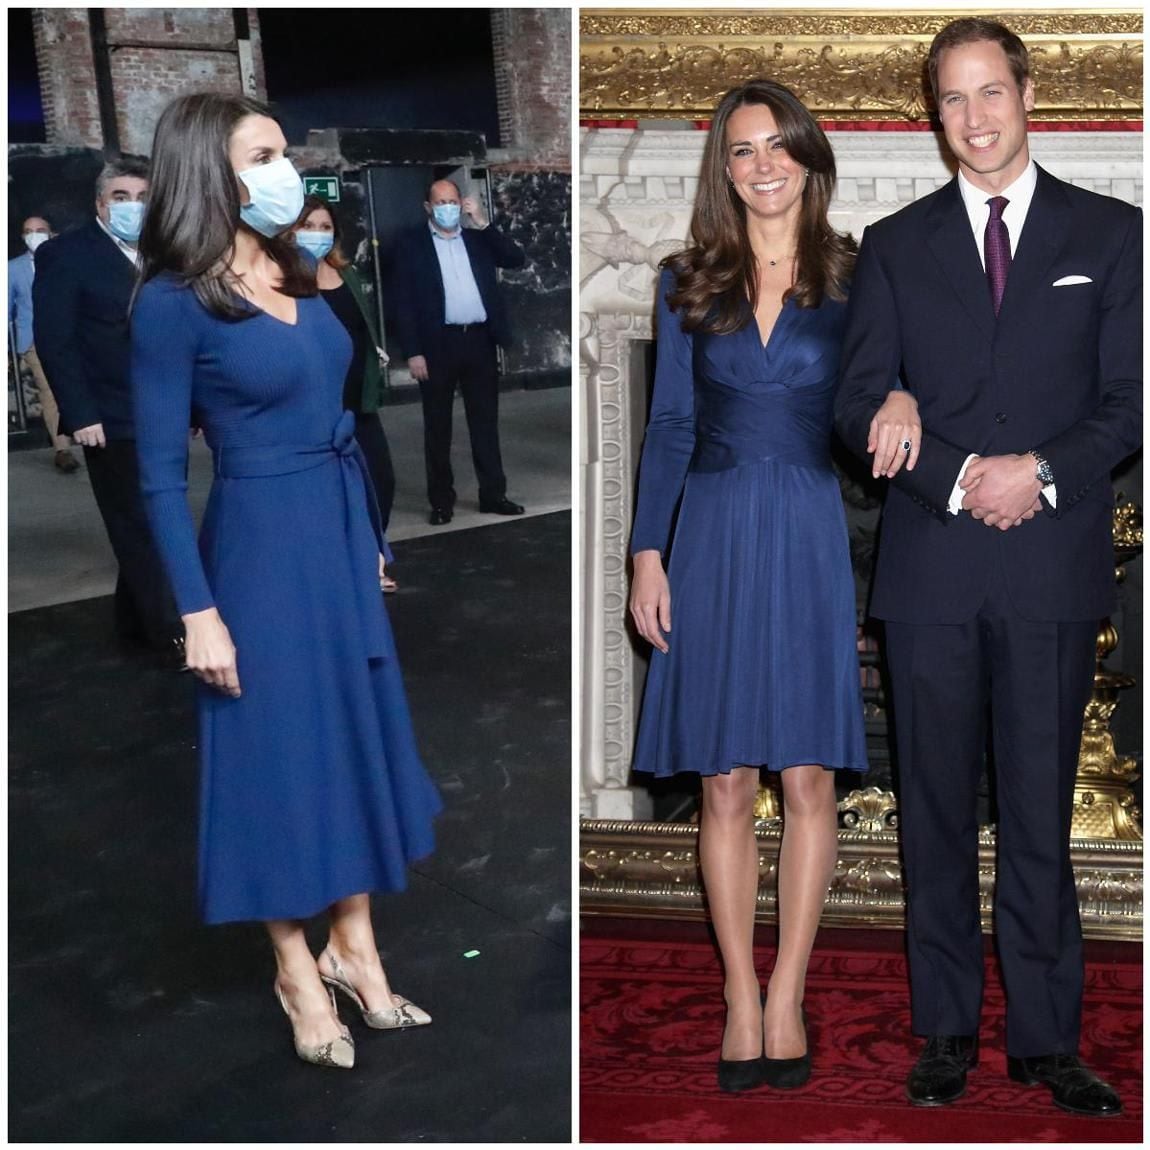 Queen Letizia's Massimo Dutti dress evoked memories of Kate's iconic engagement dress